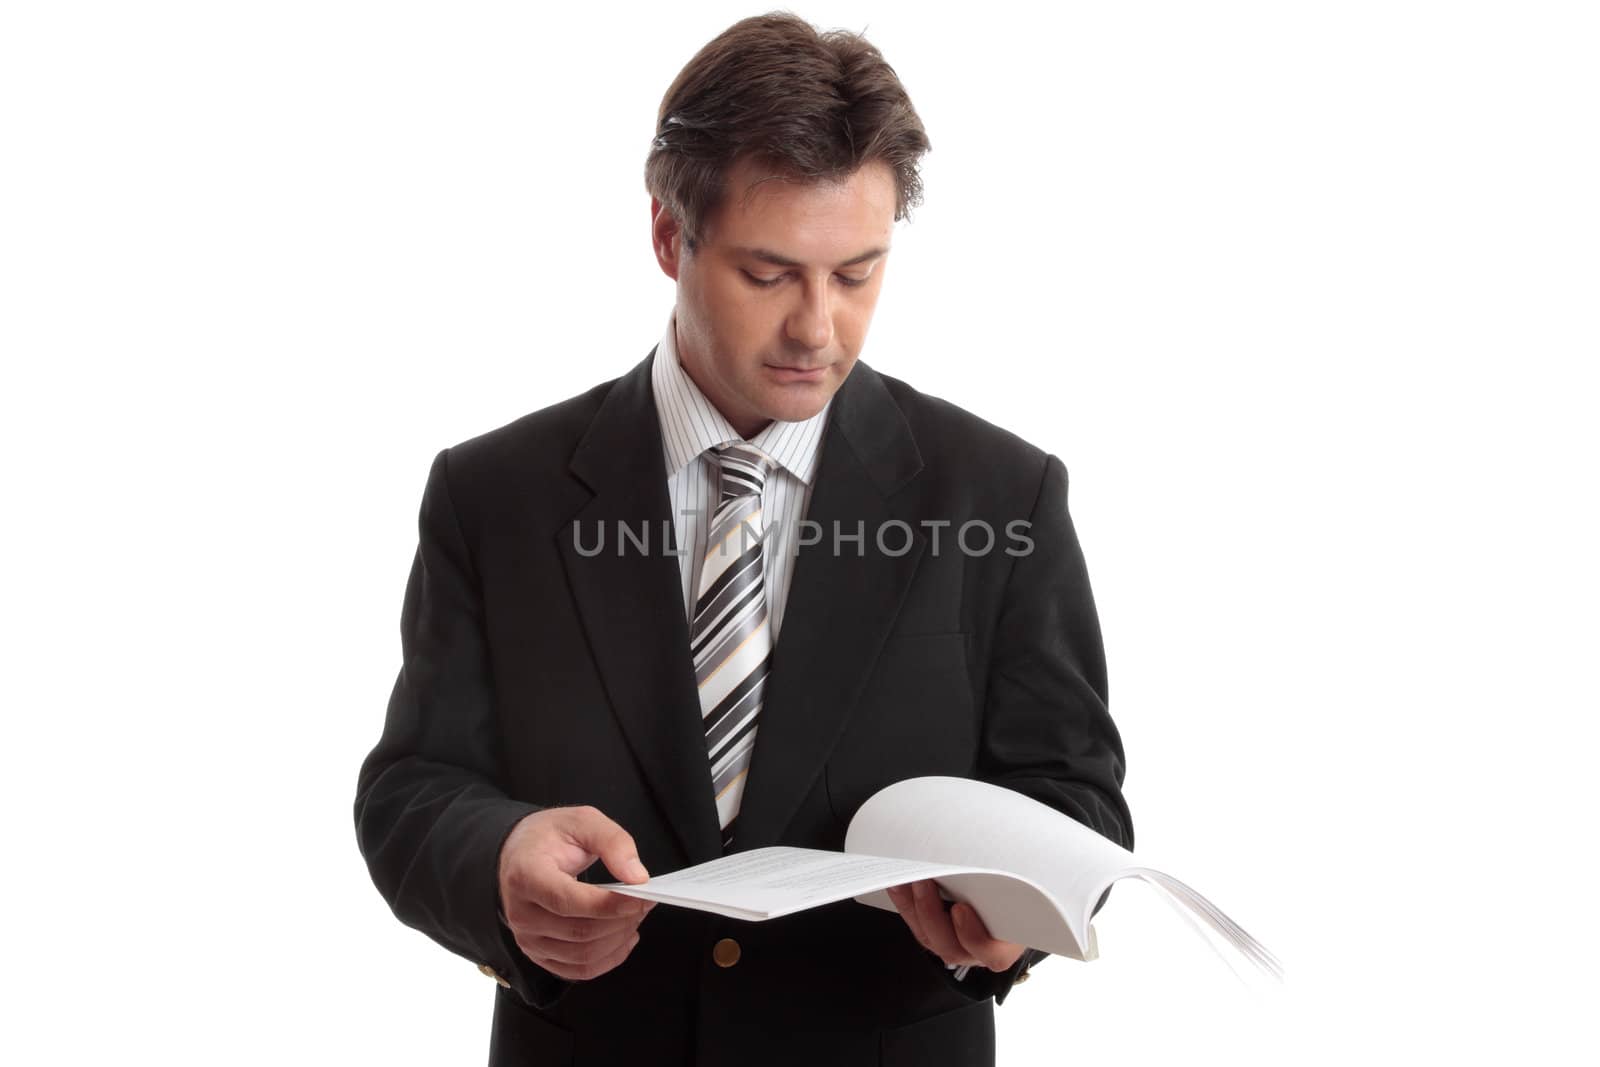 Busienssman reading a report or other document.